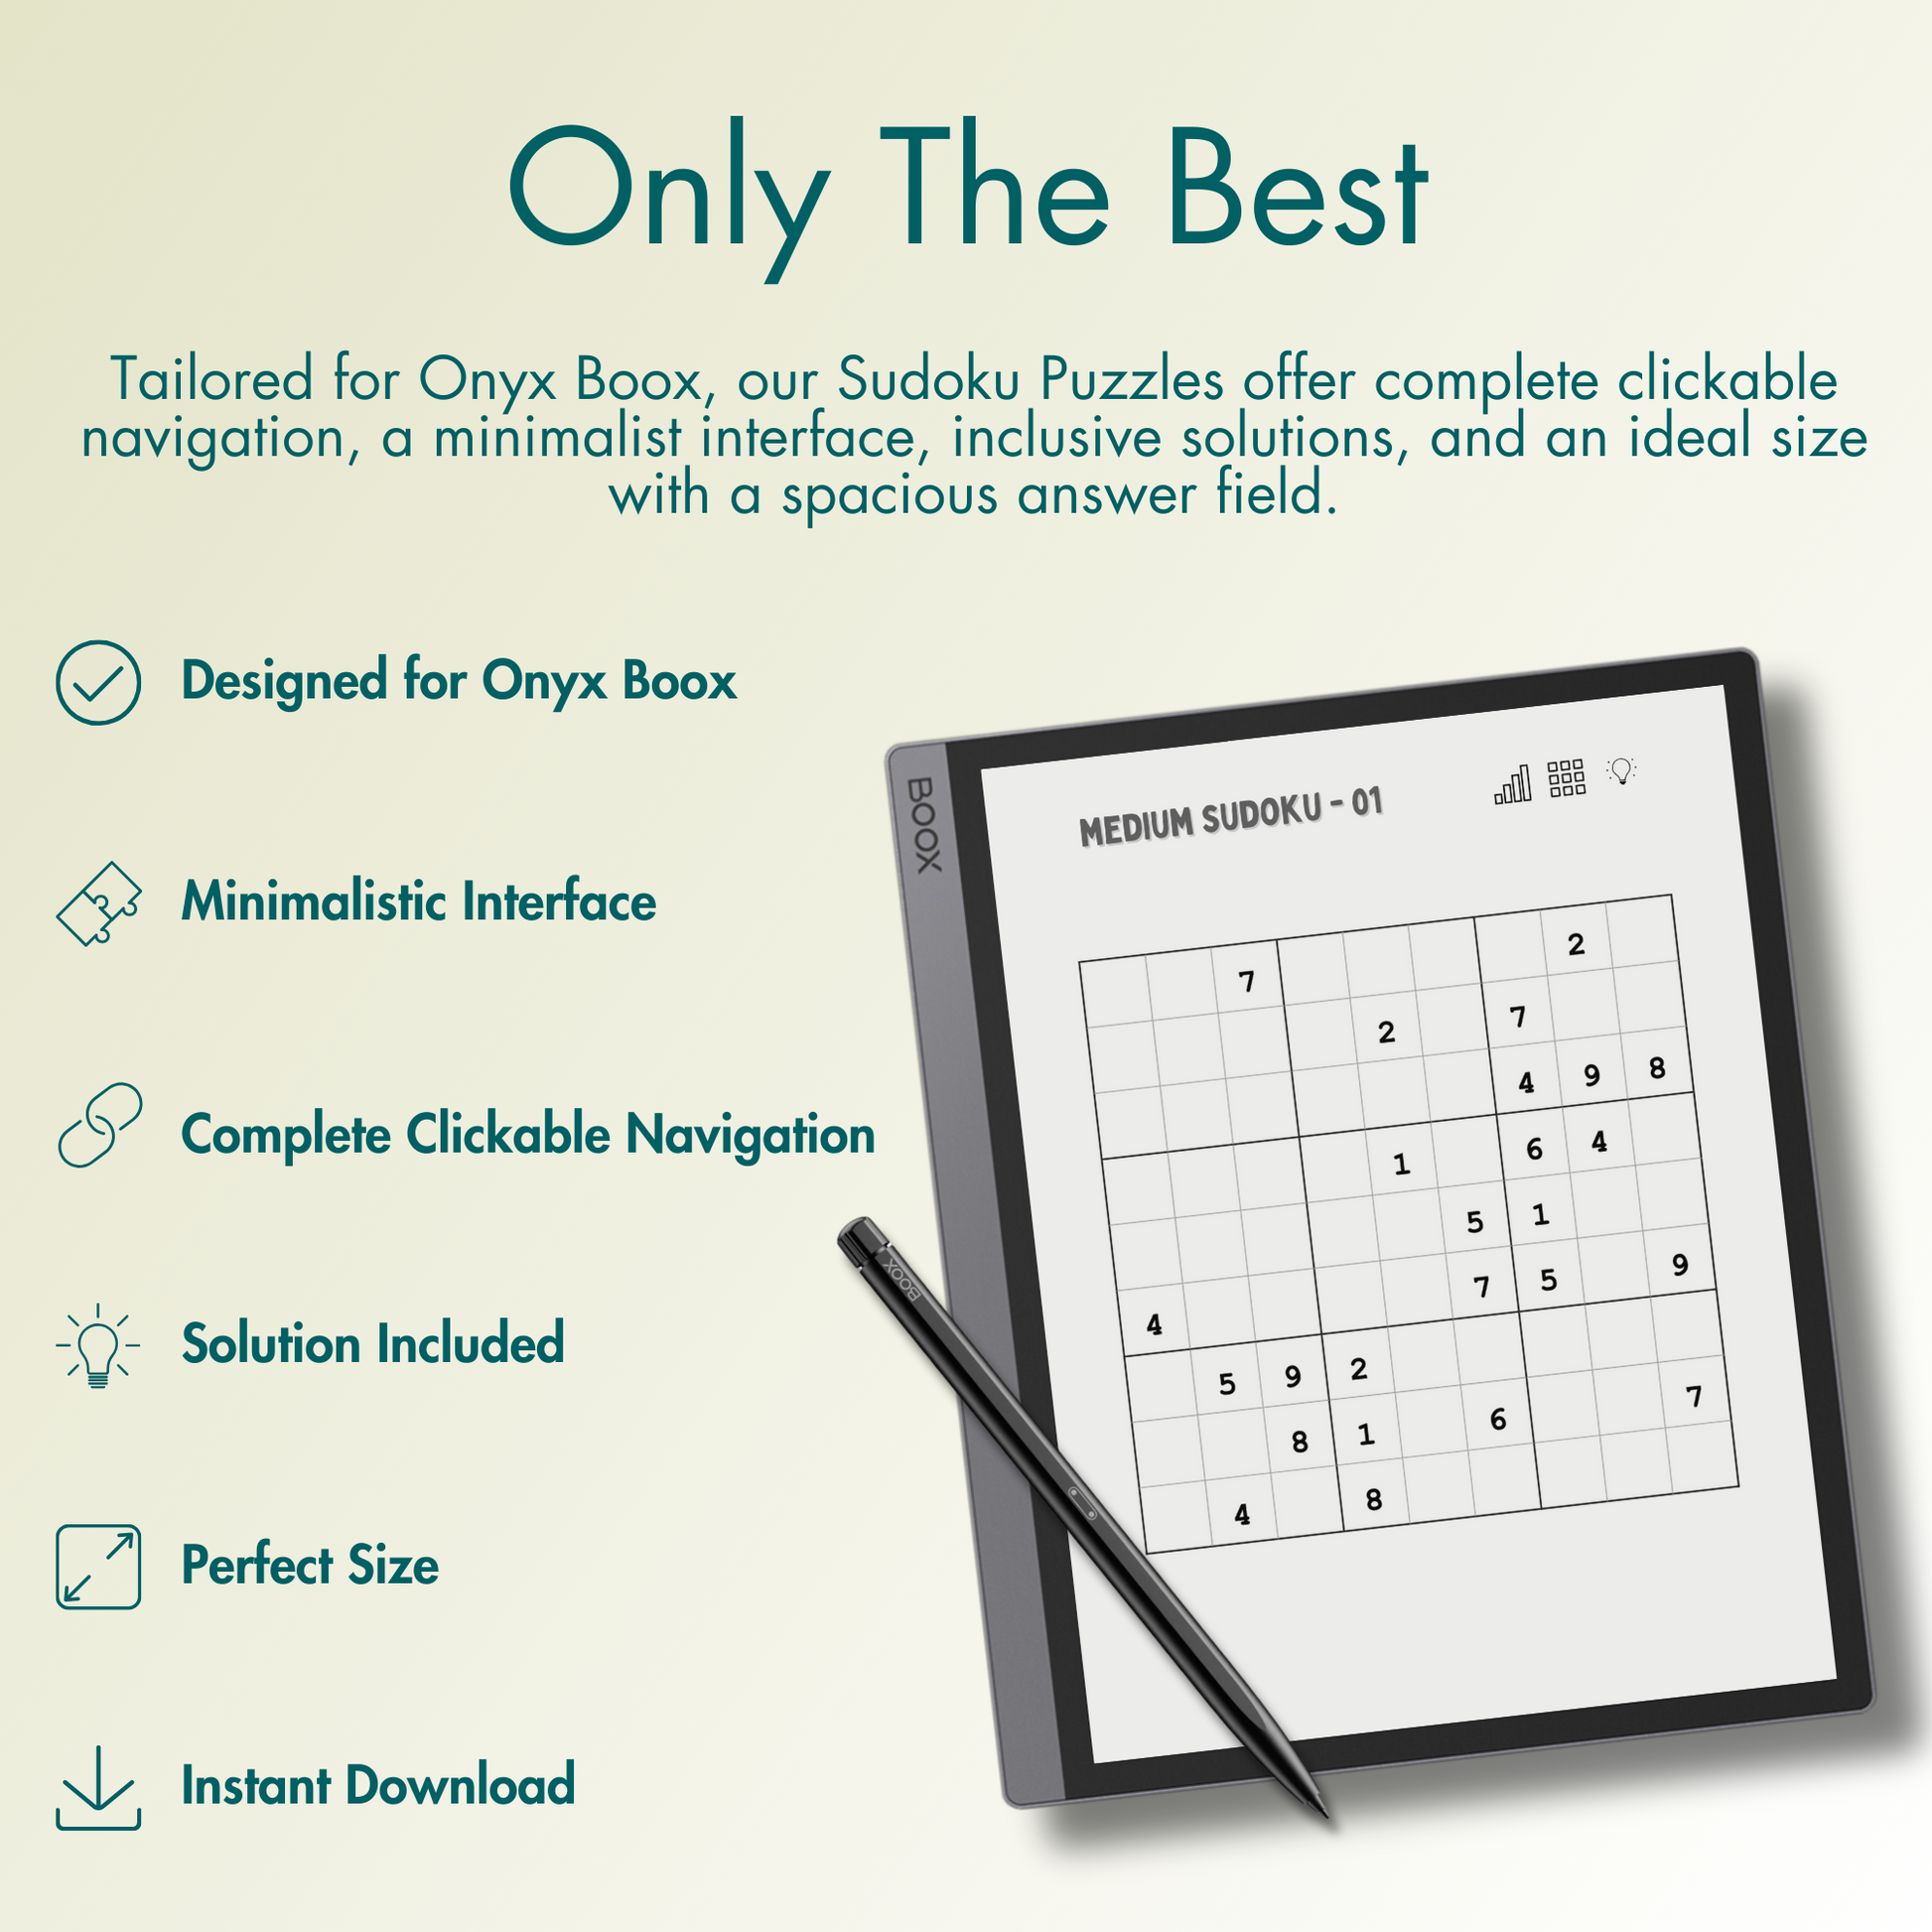 Our Sudoku Puzzles offer complete clickable navigation, a minimalist interface, inclusive solutions, and an ideal size with a spacious answer field for Onyx Boox e-ink screen.